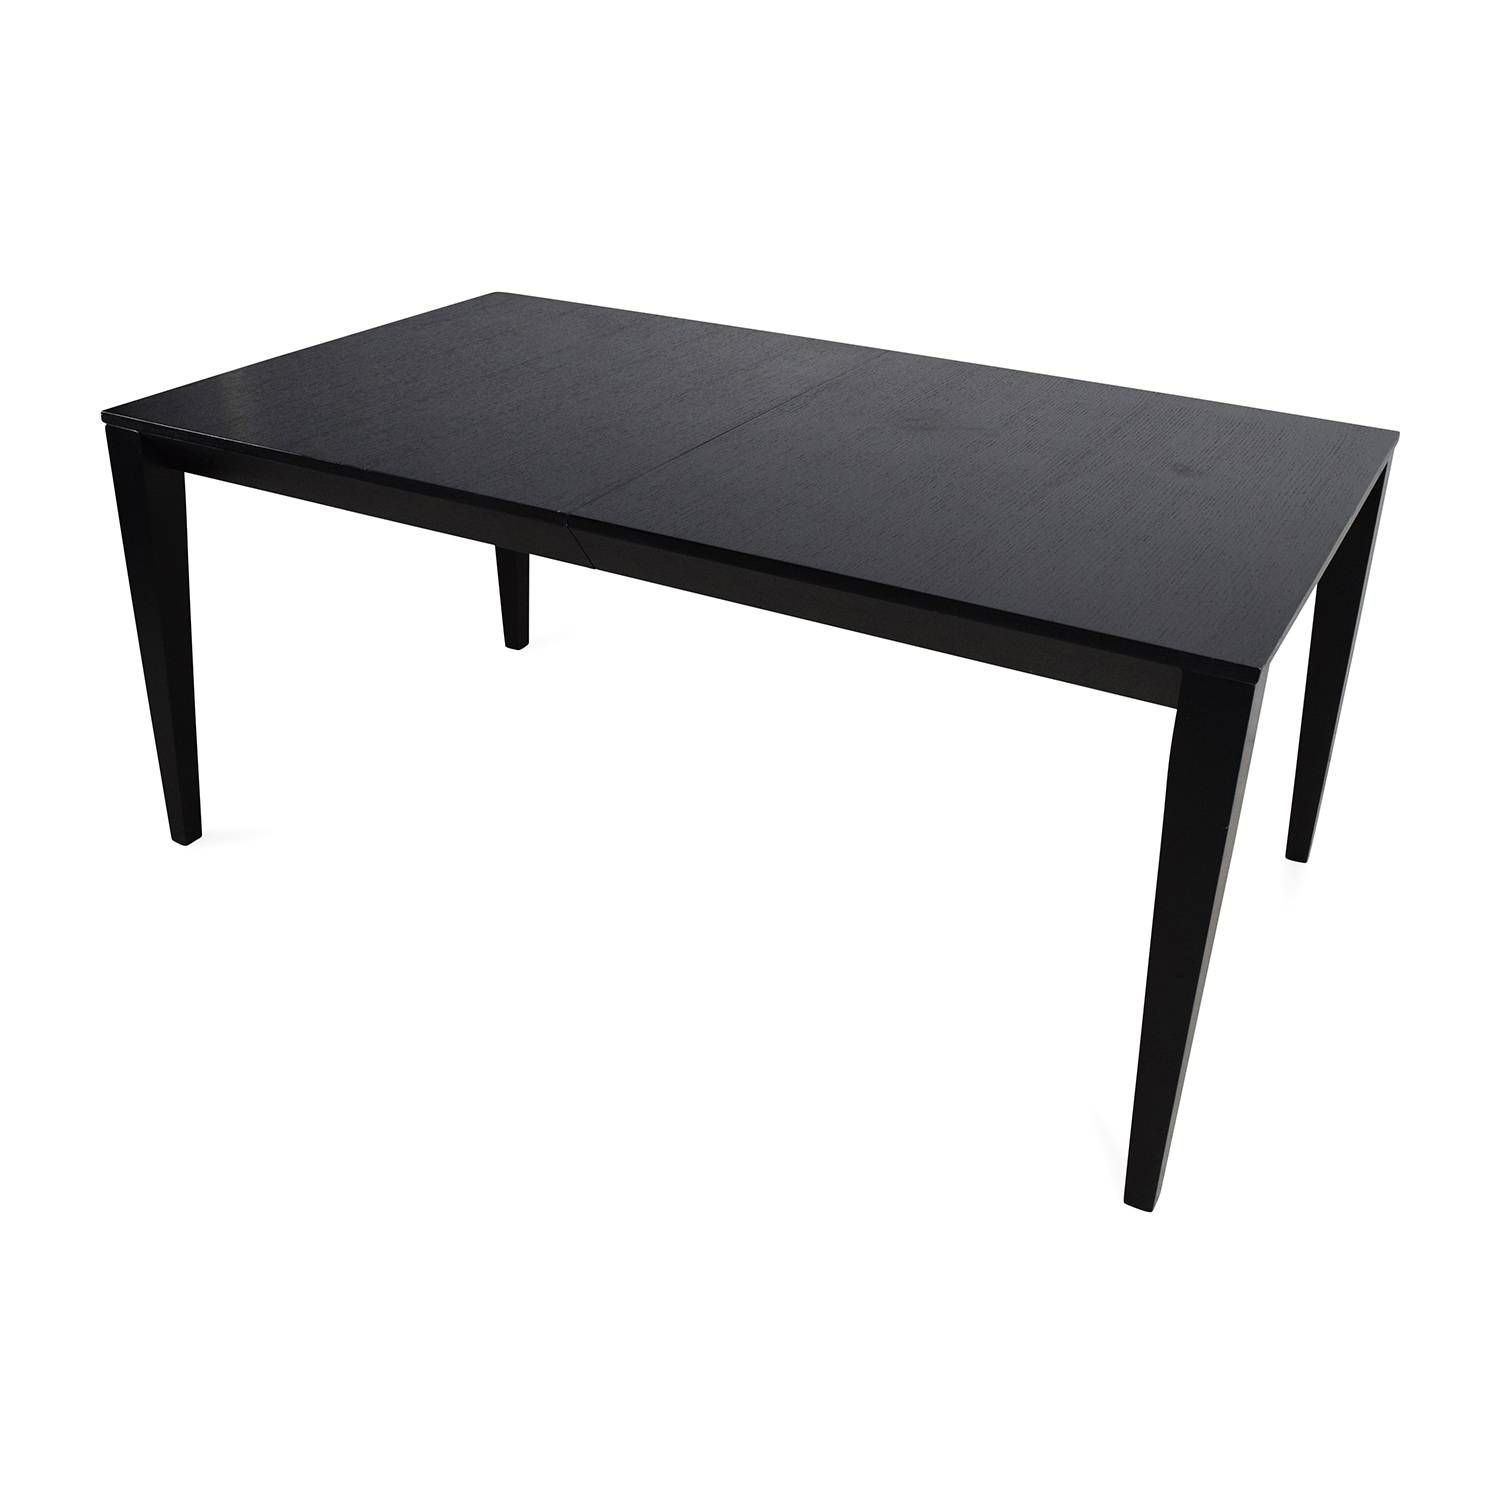 56% Off – Crate And Barrel Crate & Barrel Black Extendable Dining With Regard To Crate And Barrel Sofa Tables (Photo 15 of 15)